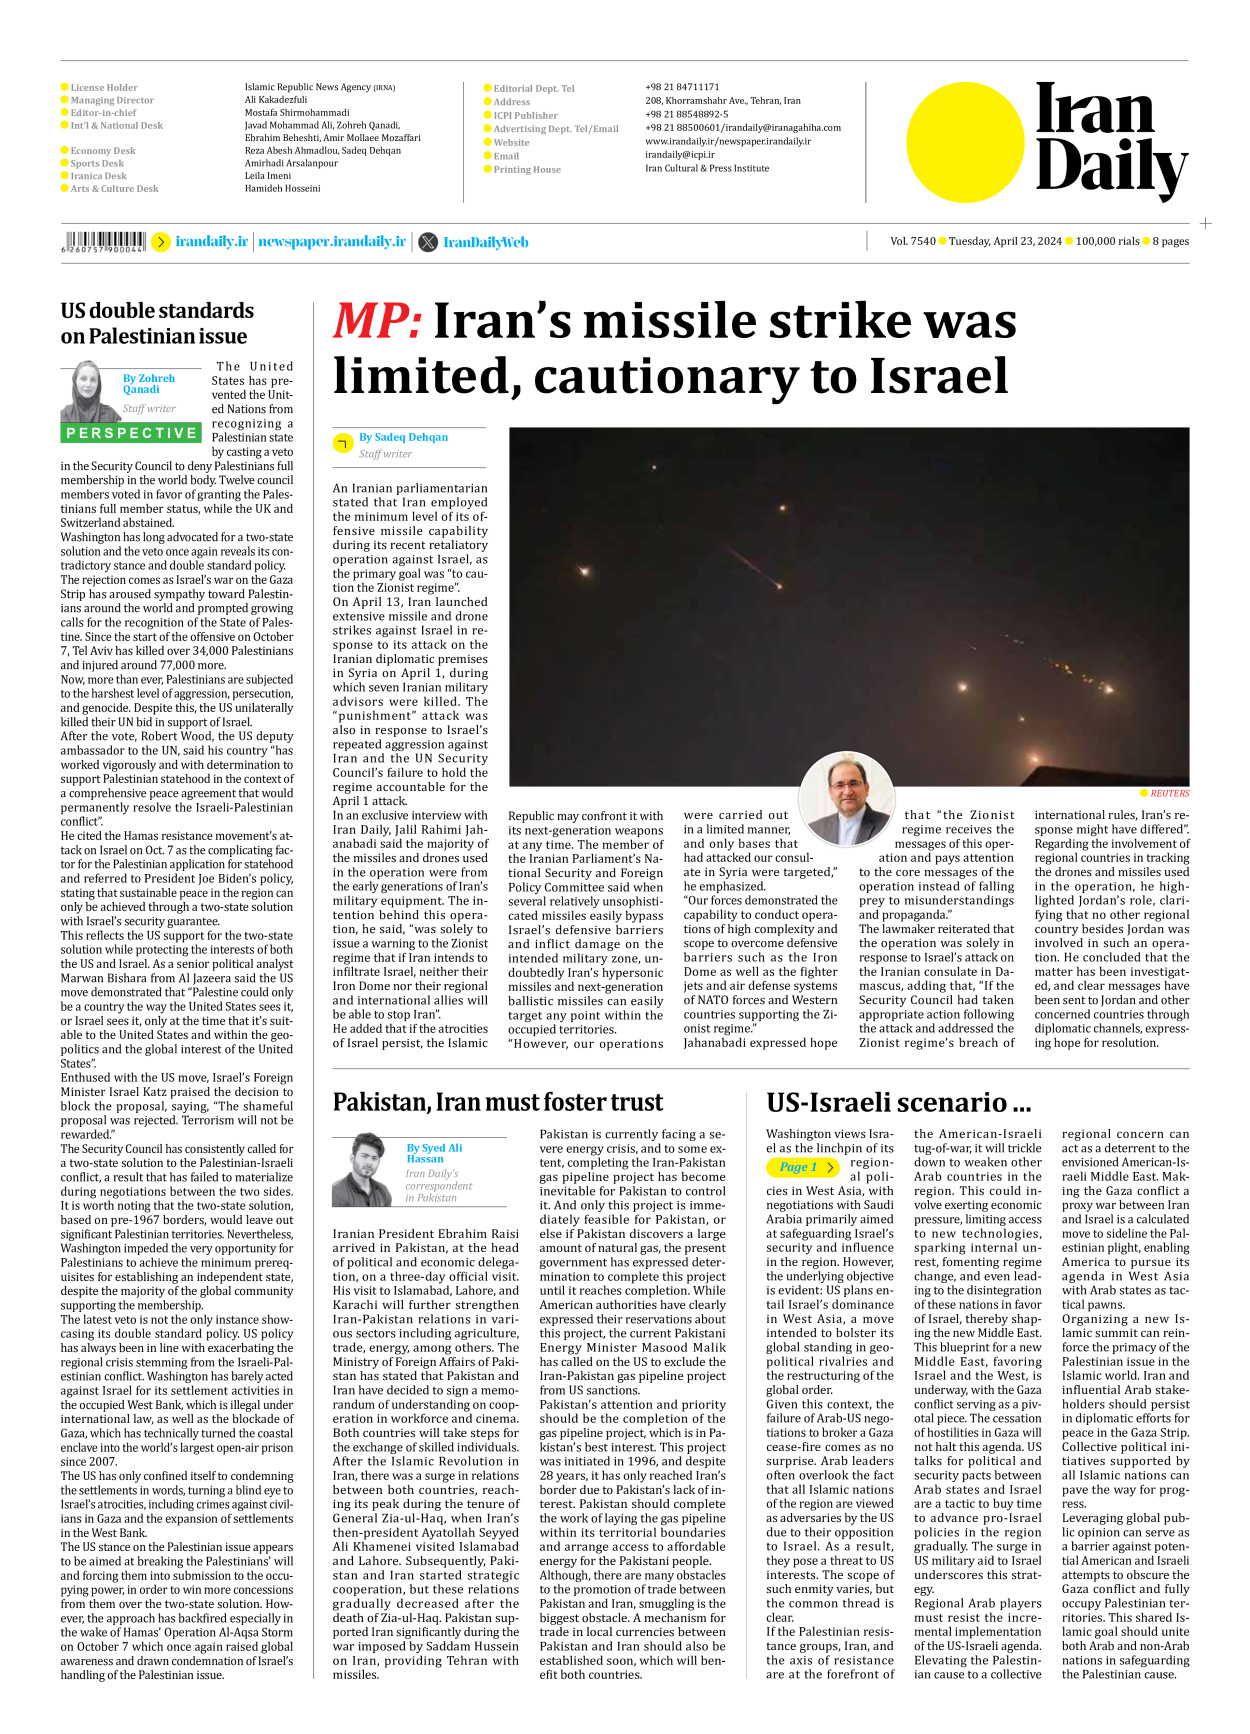 Iran Daily - Number Seven Thousand Five Hundred and Forty - 23 April 2024 - Page 8